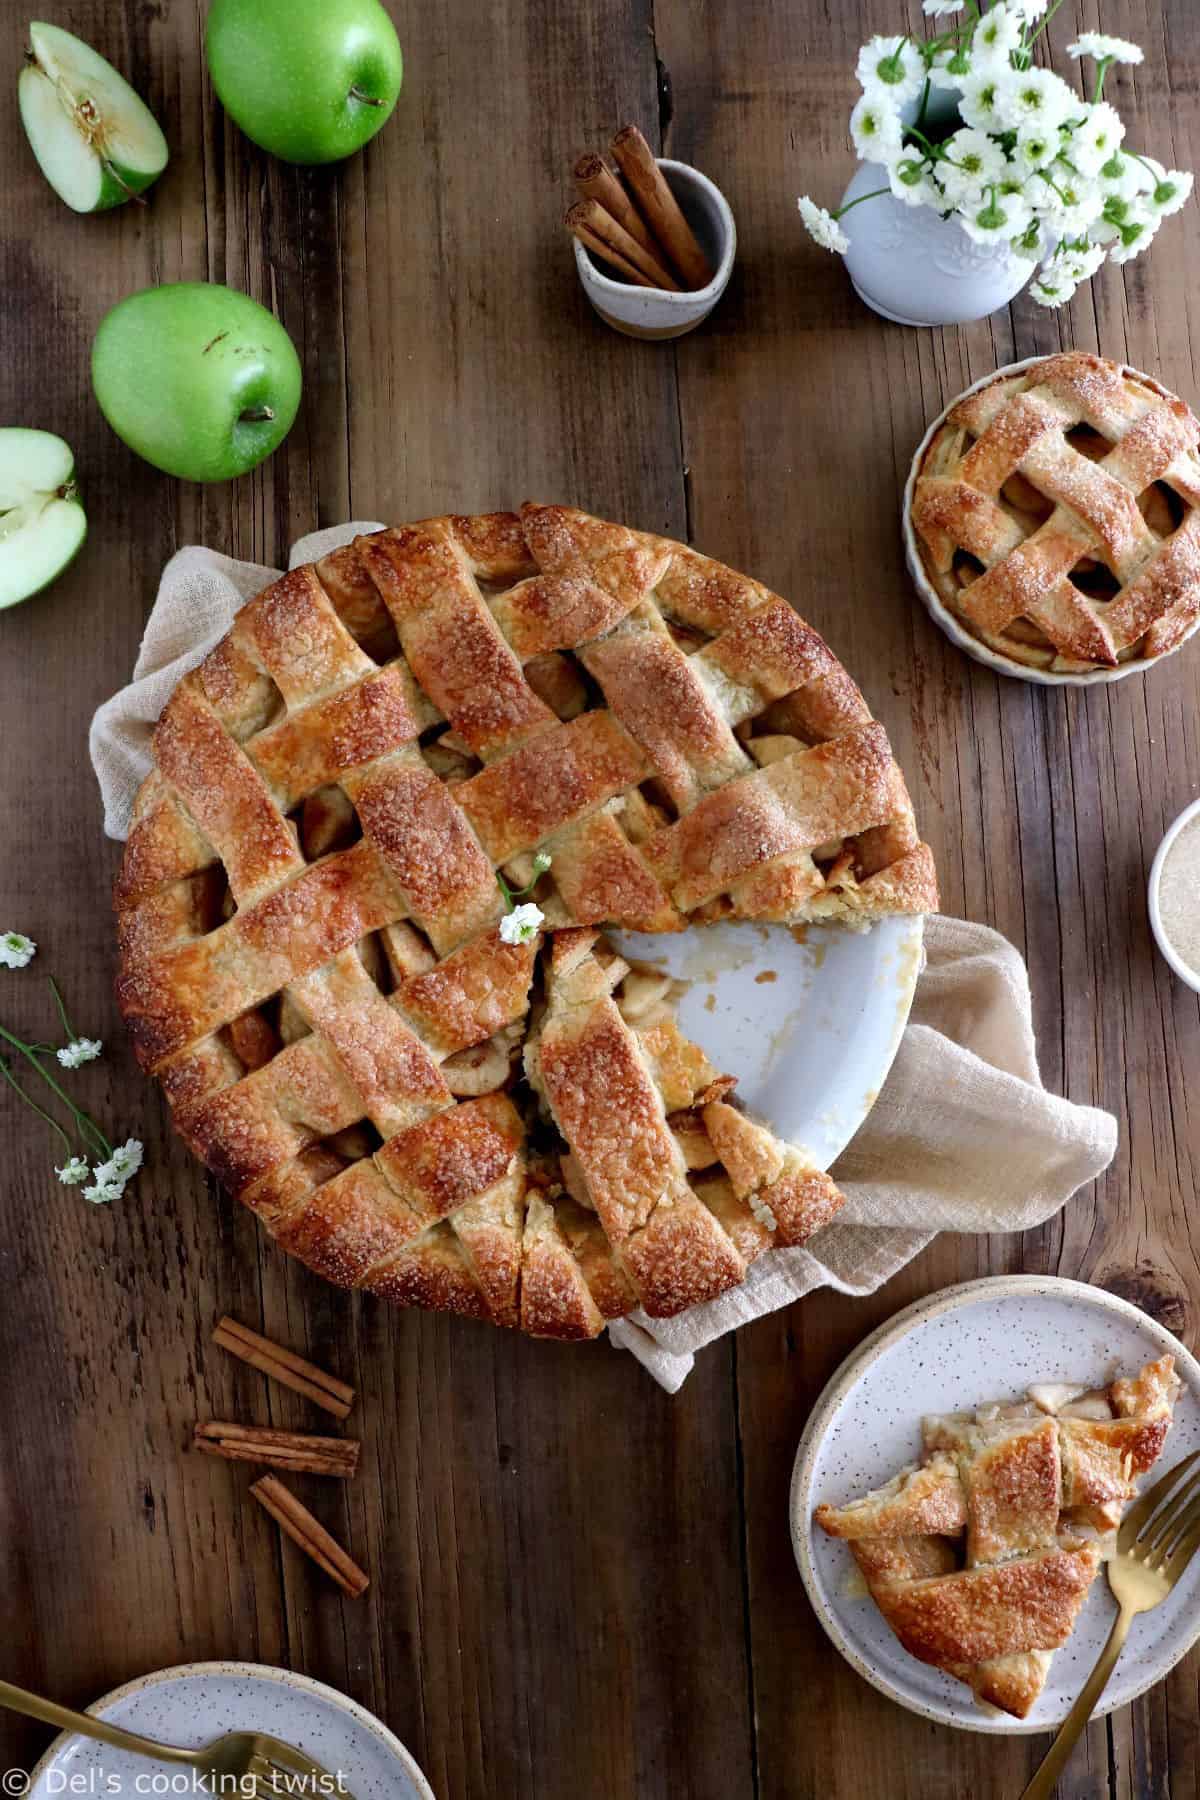 The perfect authentic American Apple Pie, with a shimmering and a sweet crunch top. This easy, classic apple pie recipe is always a success!